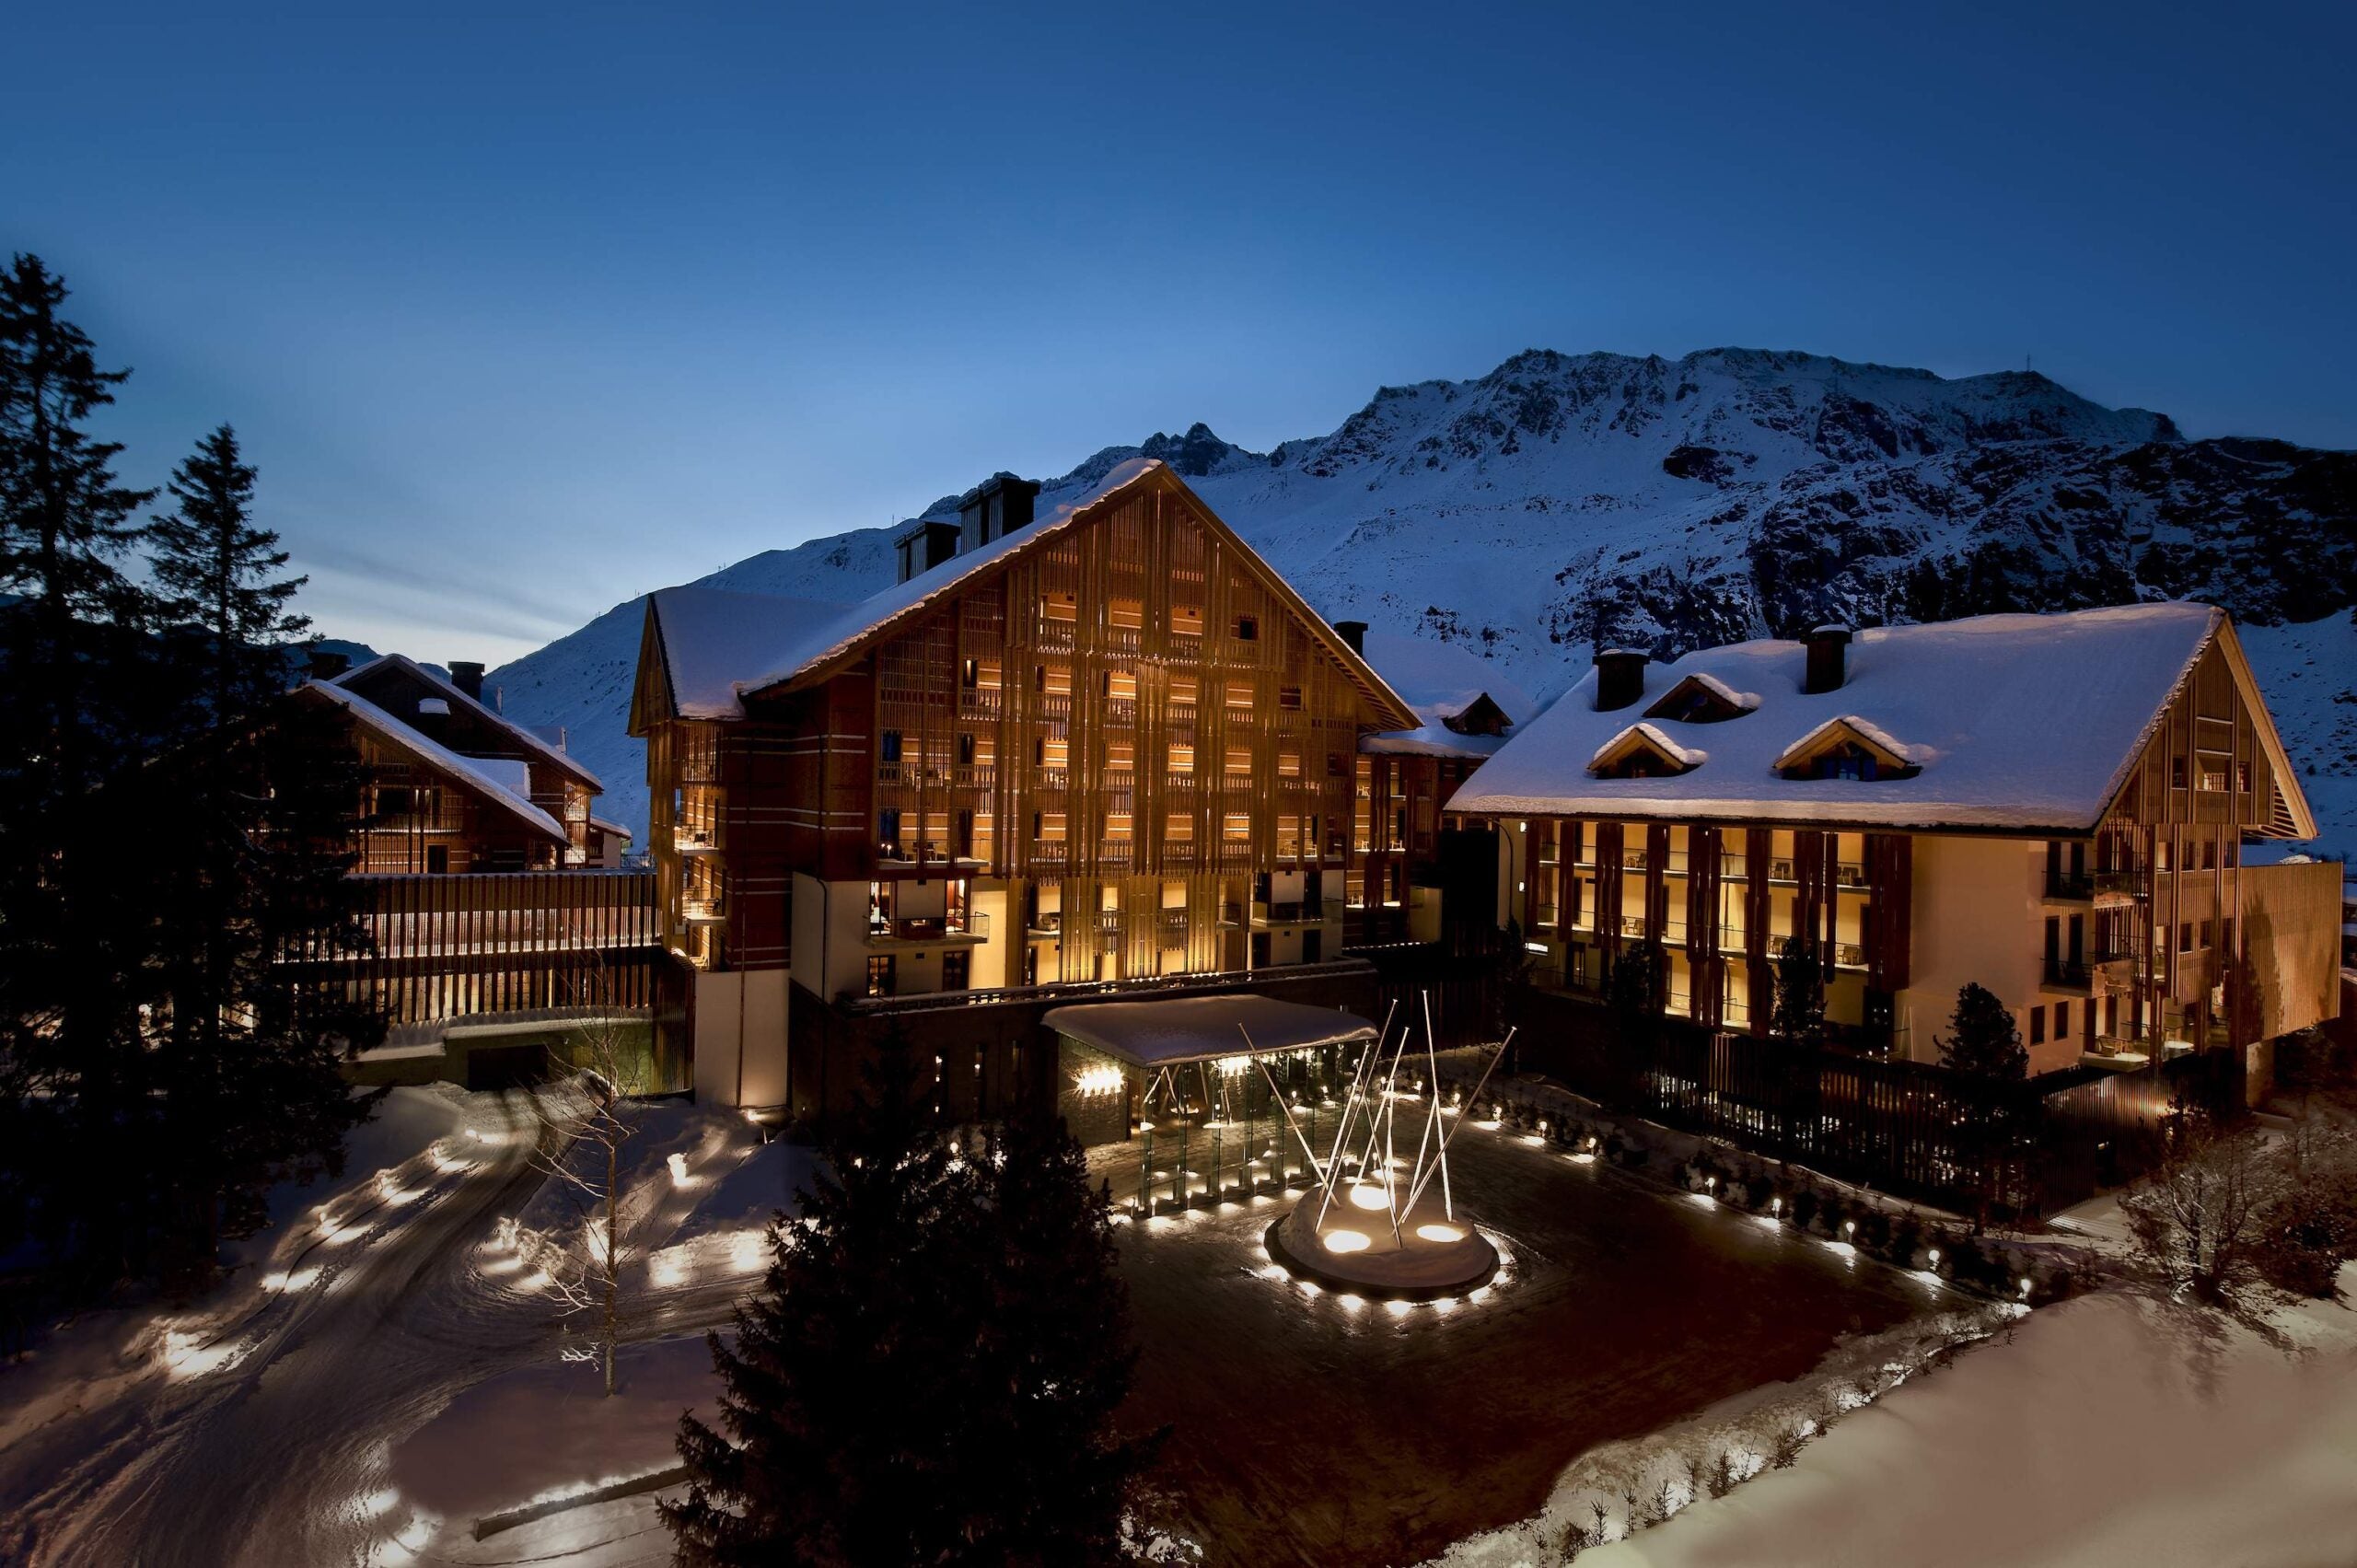 'A style that James Bond himself would admire' - inside the Chedi Andermatt